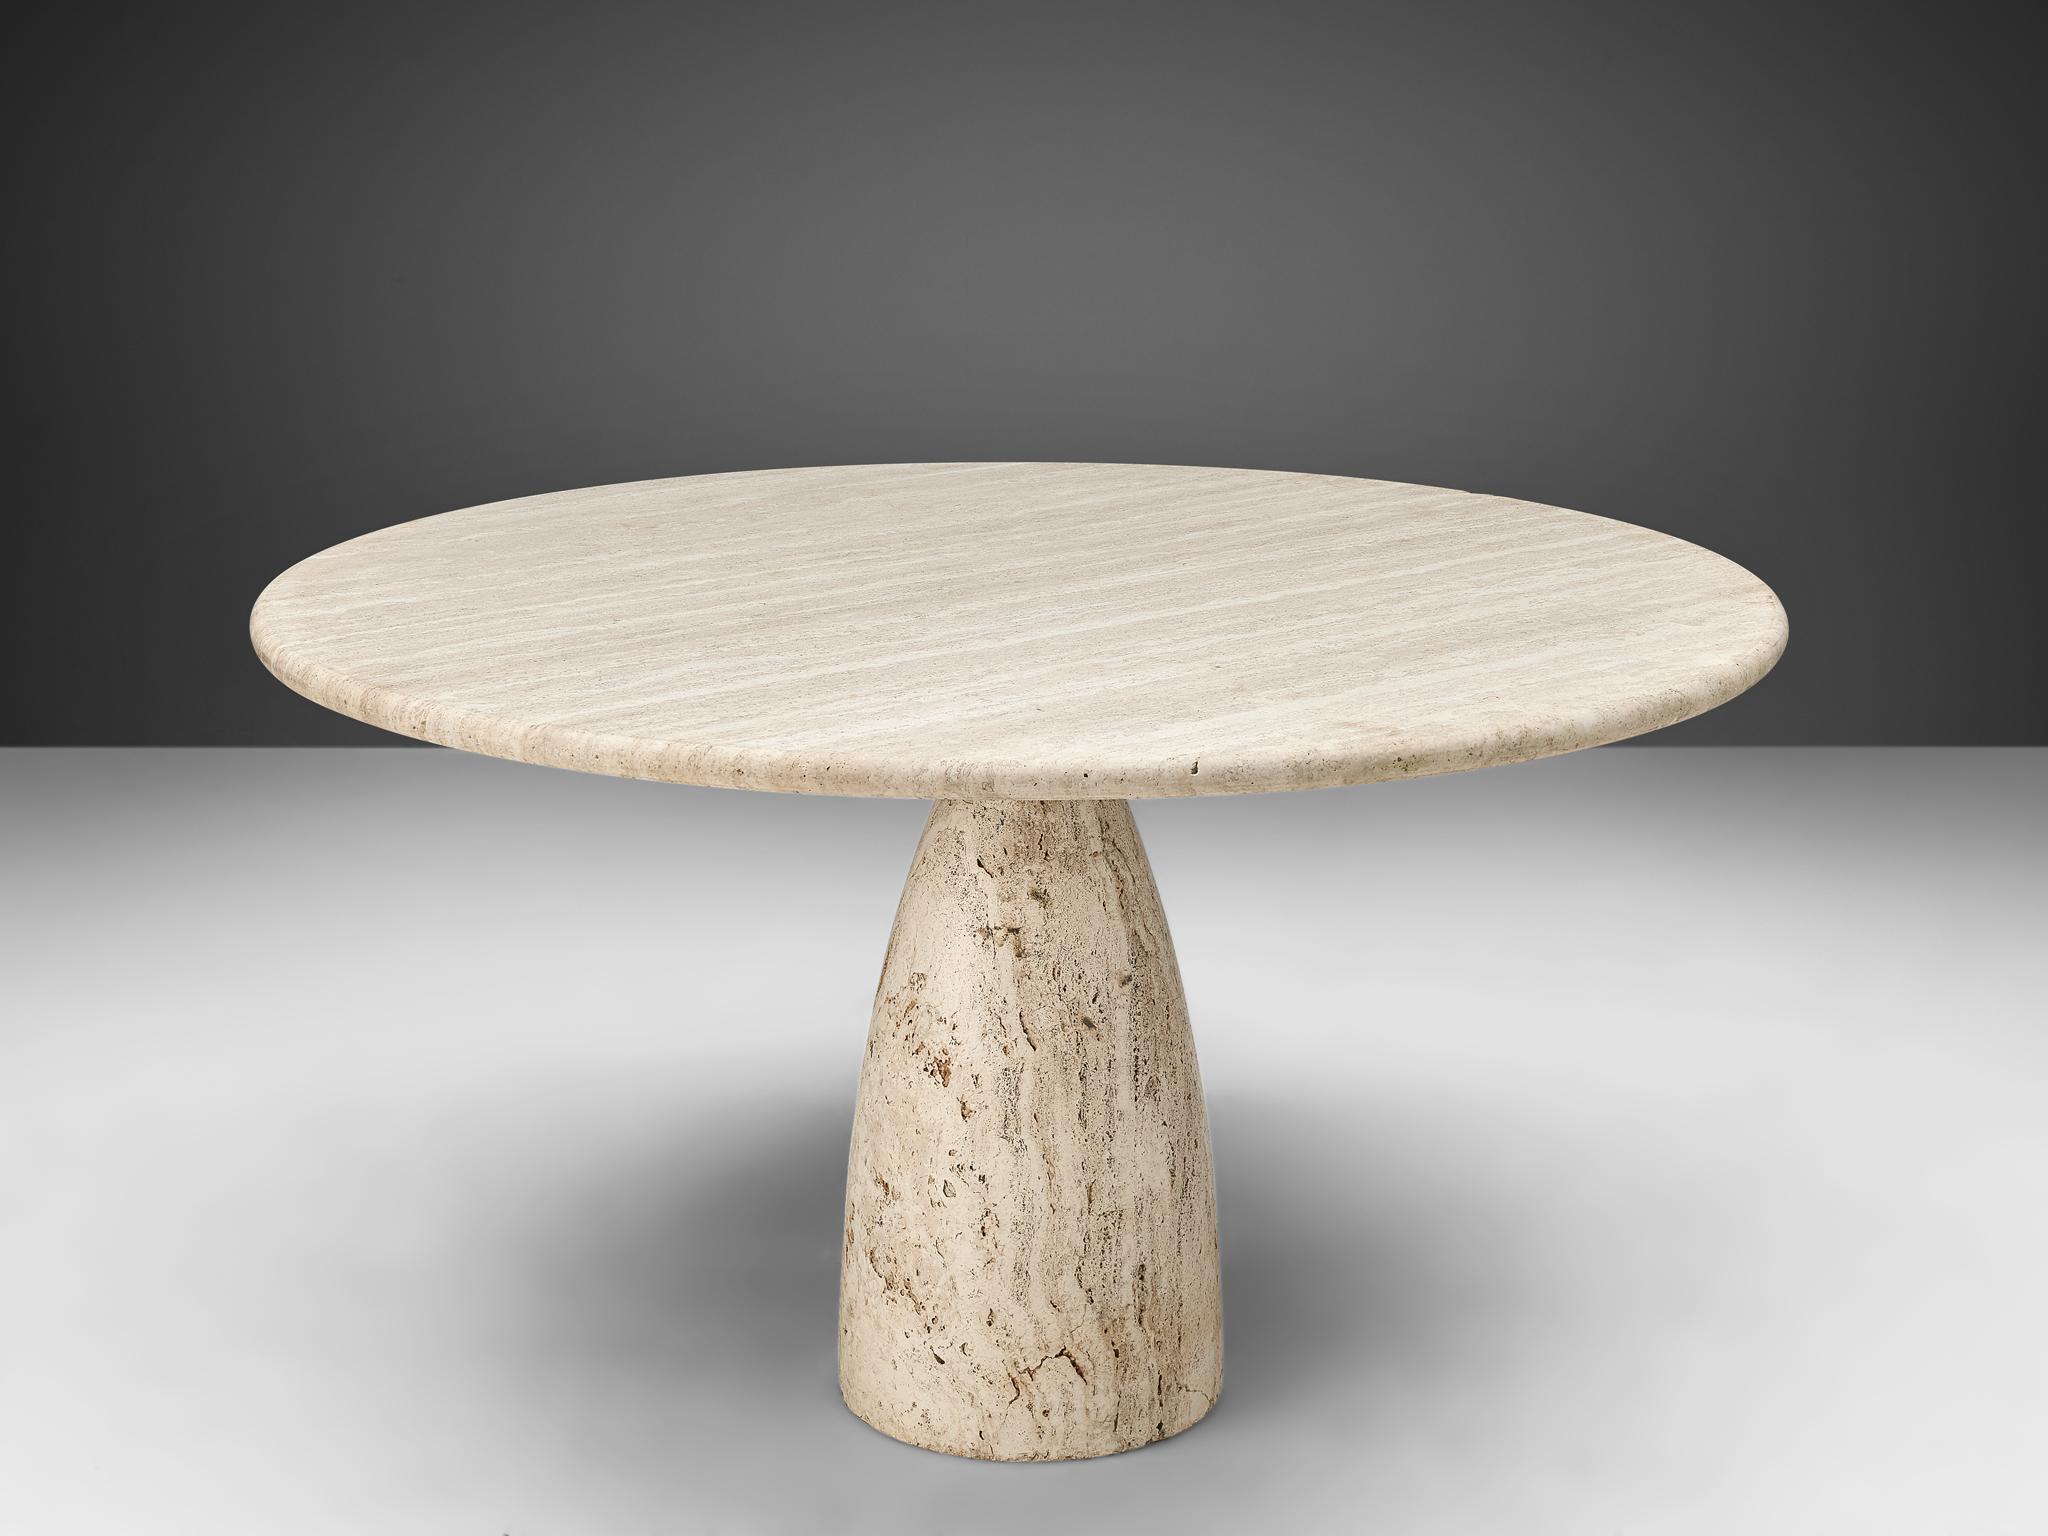 Dining table, travertine, Europe, 1970s.

This solid dining table features a colon, cone shaped foot and a thick circular travertine tabletop. The aesthetics are archetypical for postmodern design, bearing references to architectural forms and